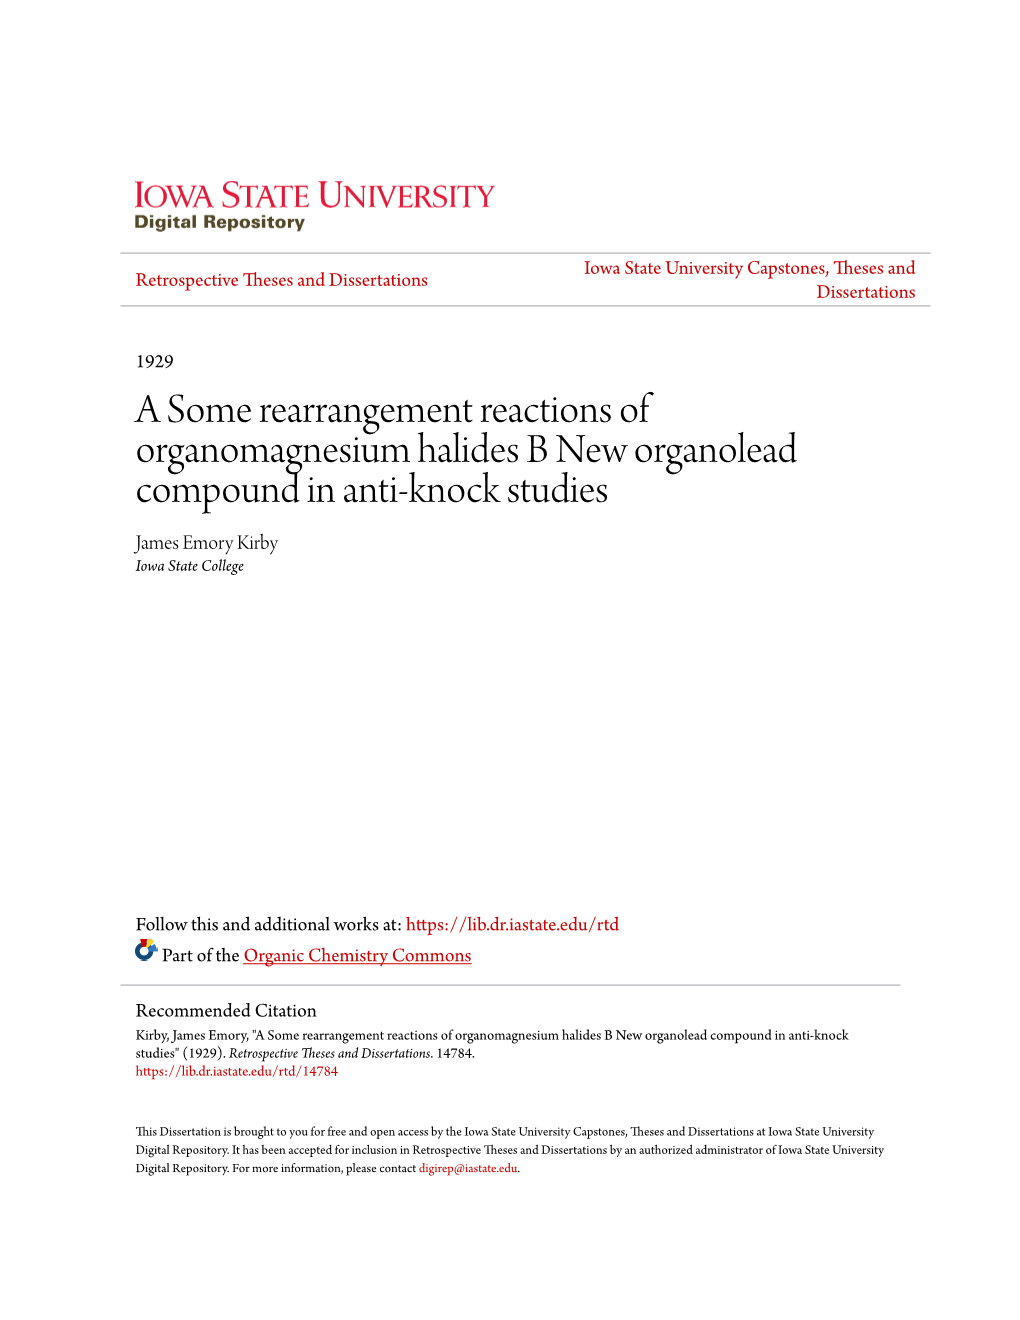 A Some Rearrangement Reactions of Organomagnesium Halides B New Organolead Compound in Anti-Knock Studies James Emory Kirby Iowa State College